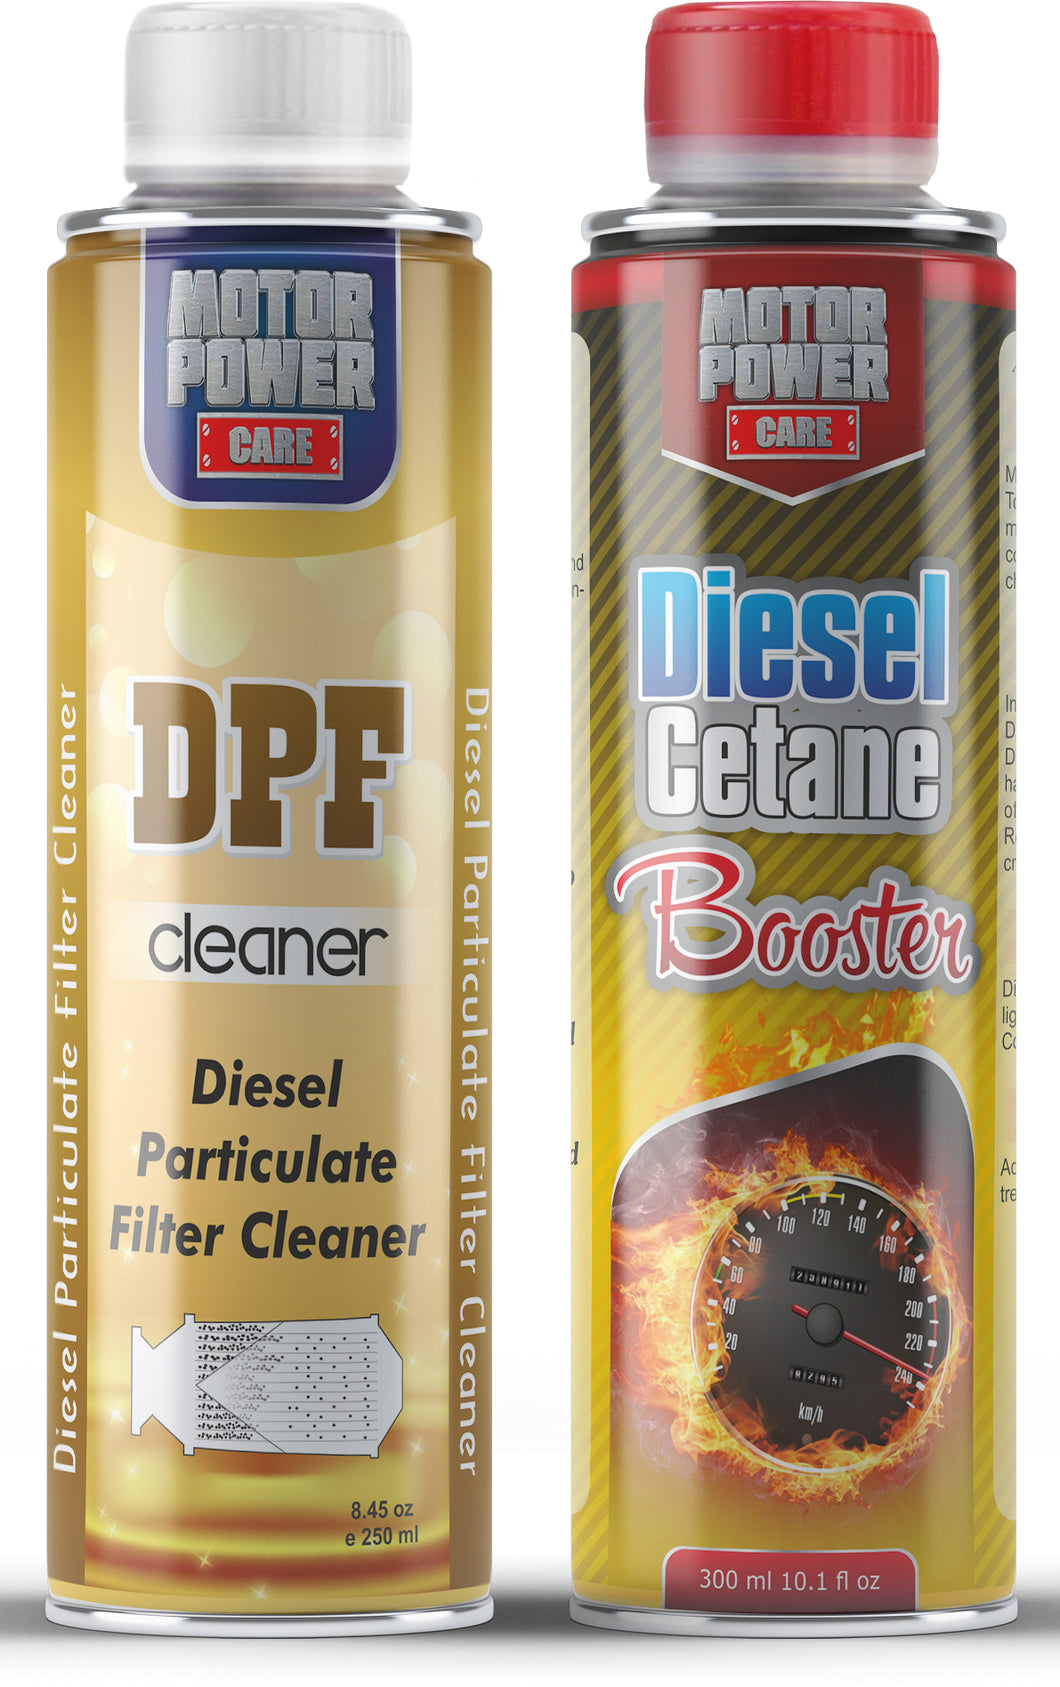 Diesel system treatment kit, DPF cleaner & Cetain Booster high